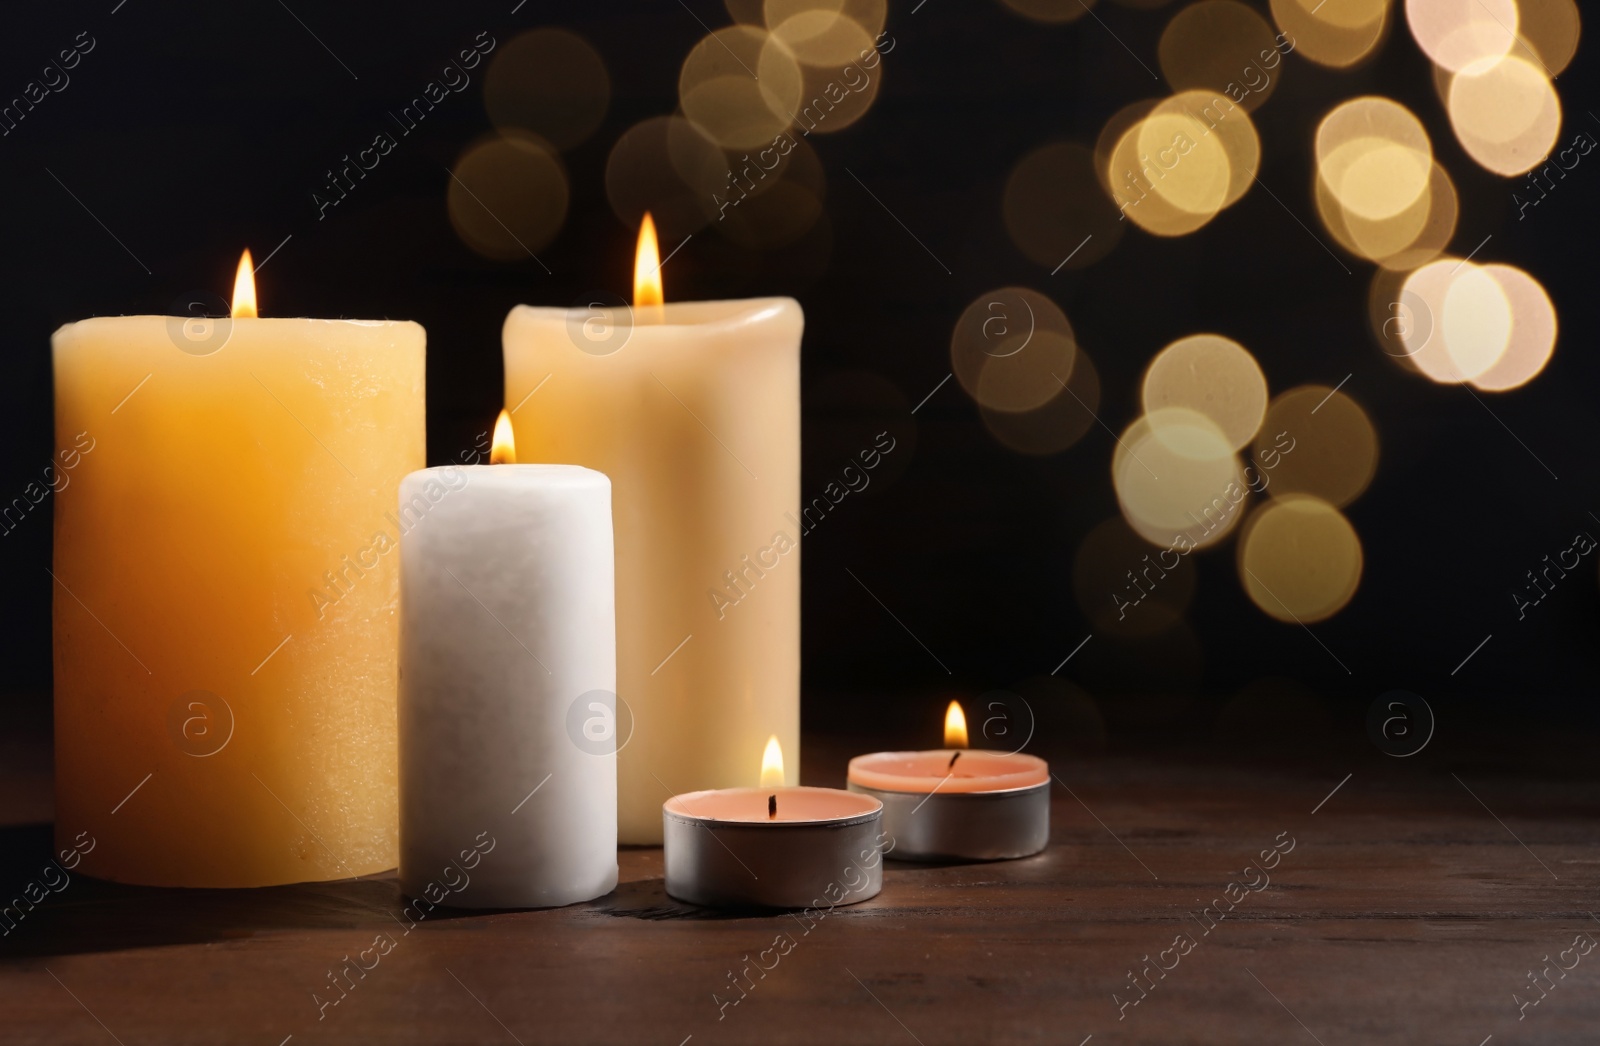 Image of Different wax candles burning on table against dark background with blurred lights. Bokeh effect